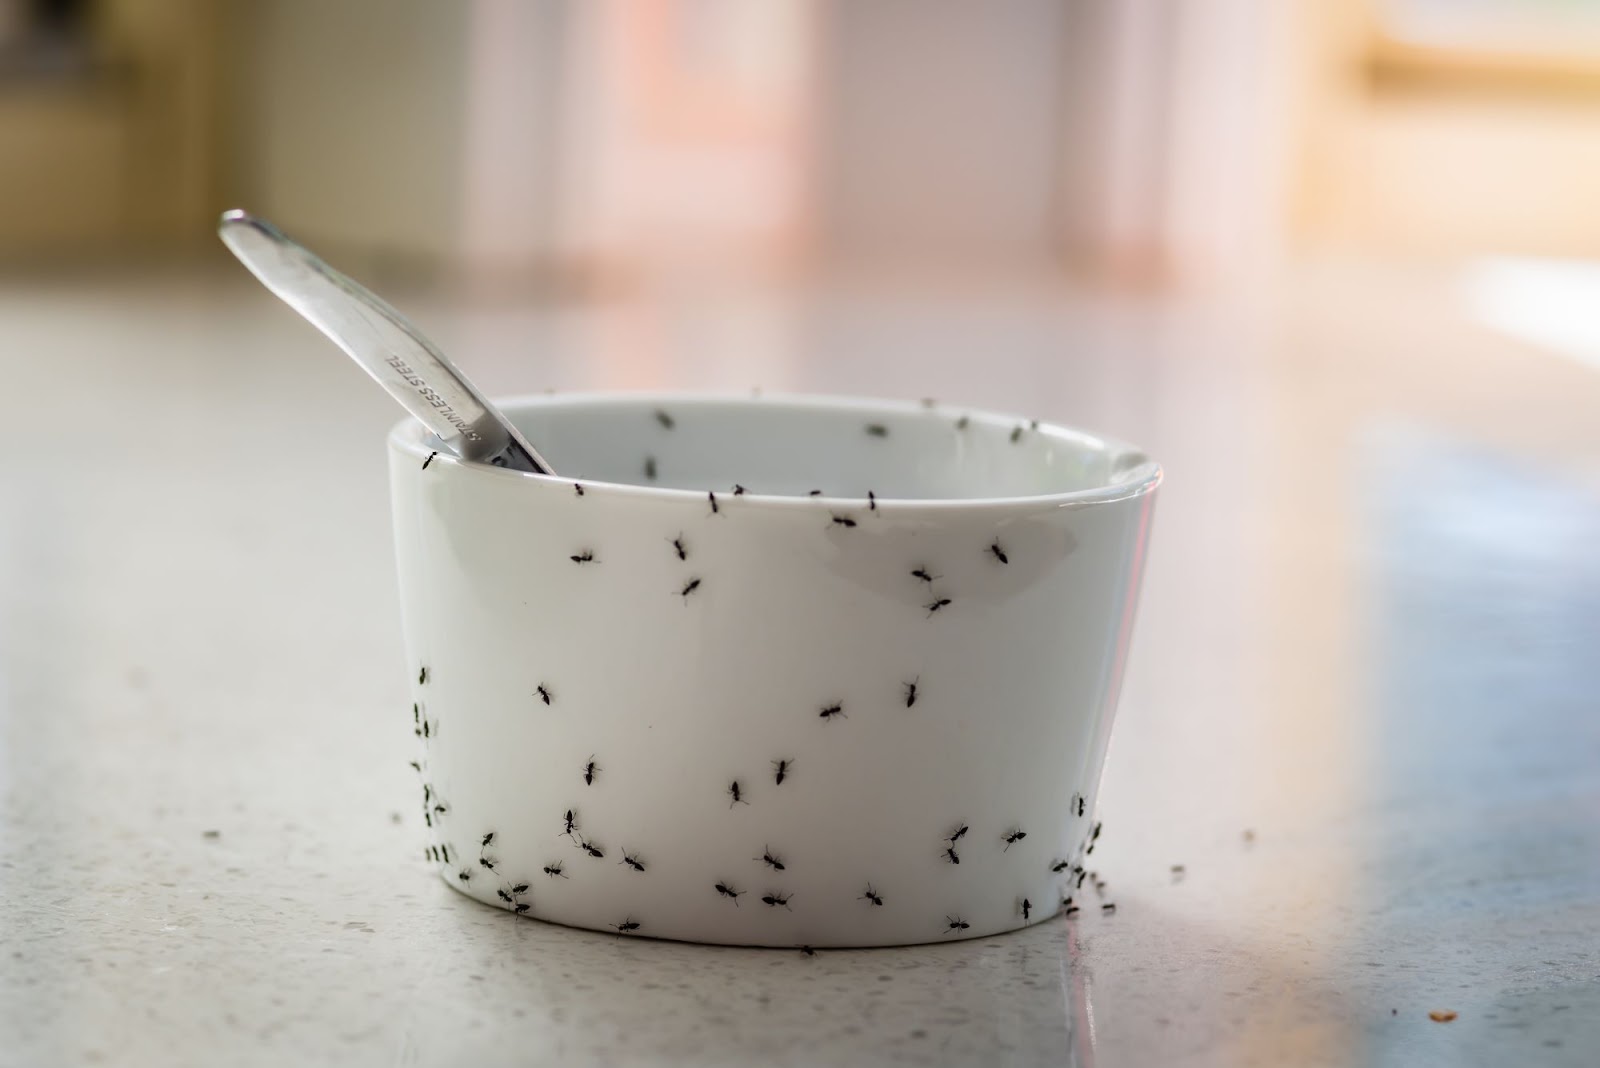 Ants on a cup.